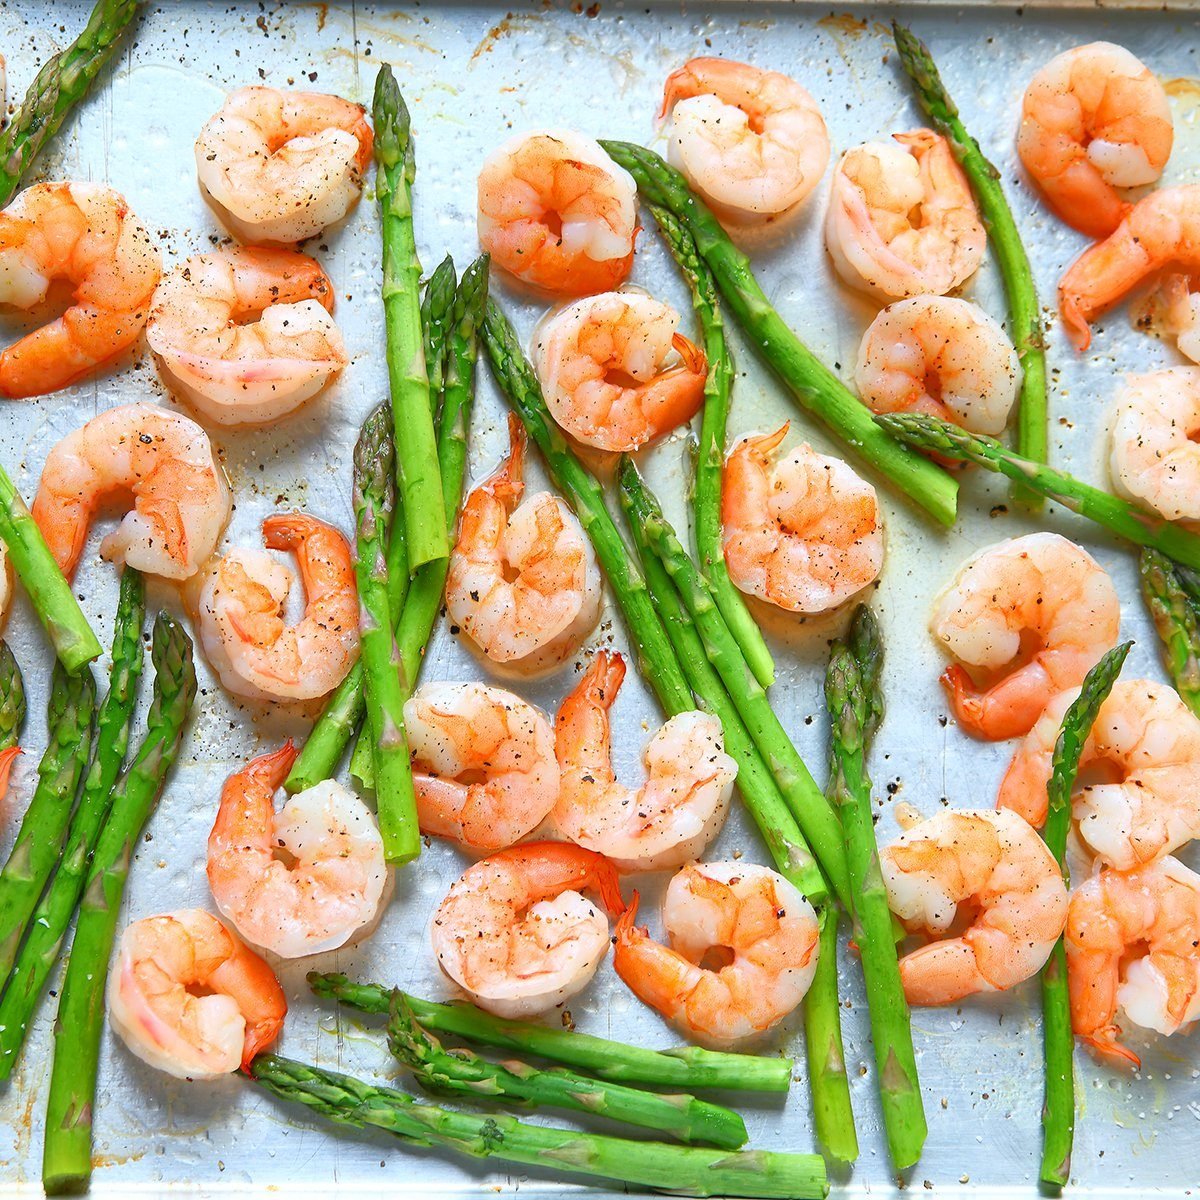 Sheet pan dinner of shrimp and asparagus with olive oil and black pepper